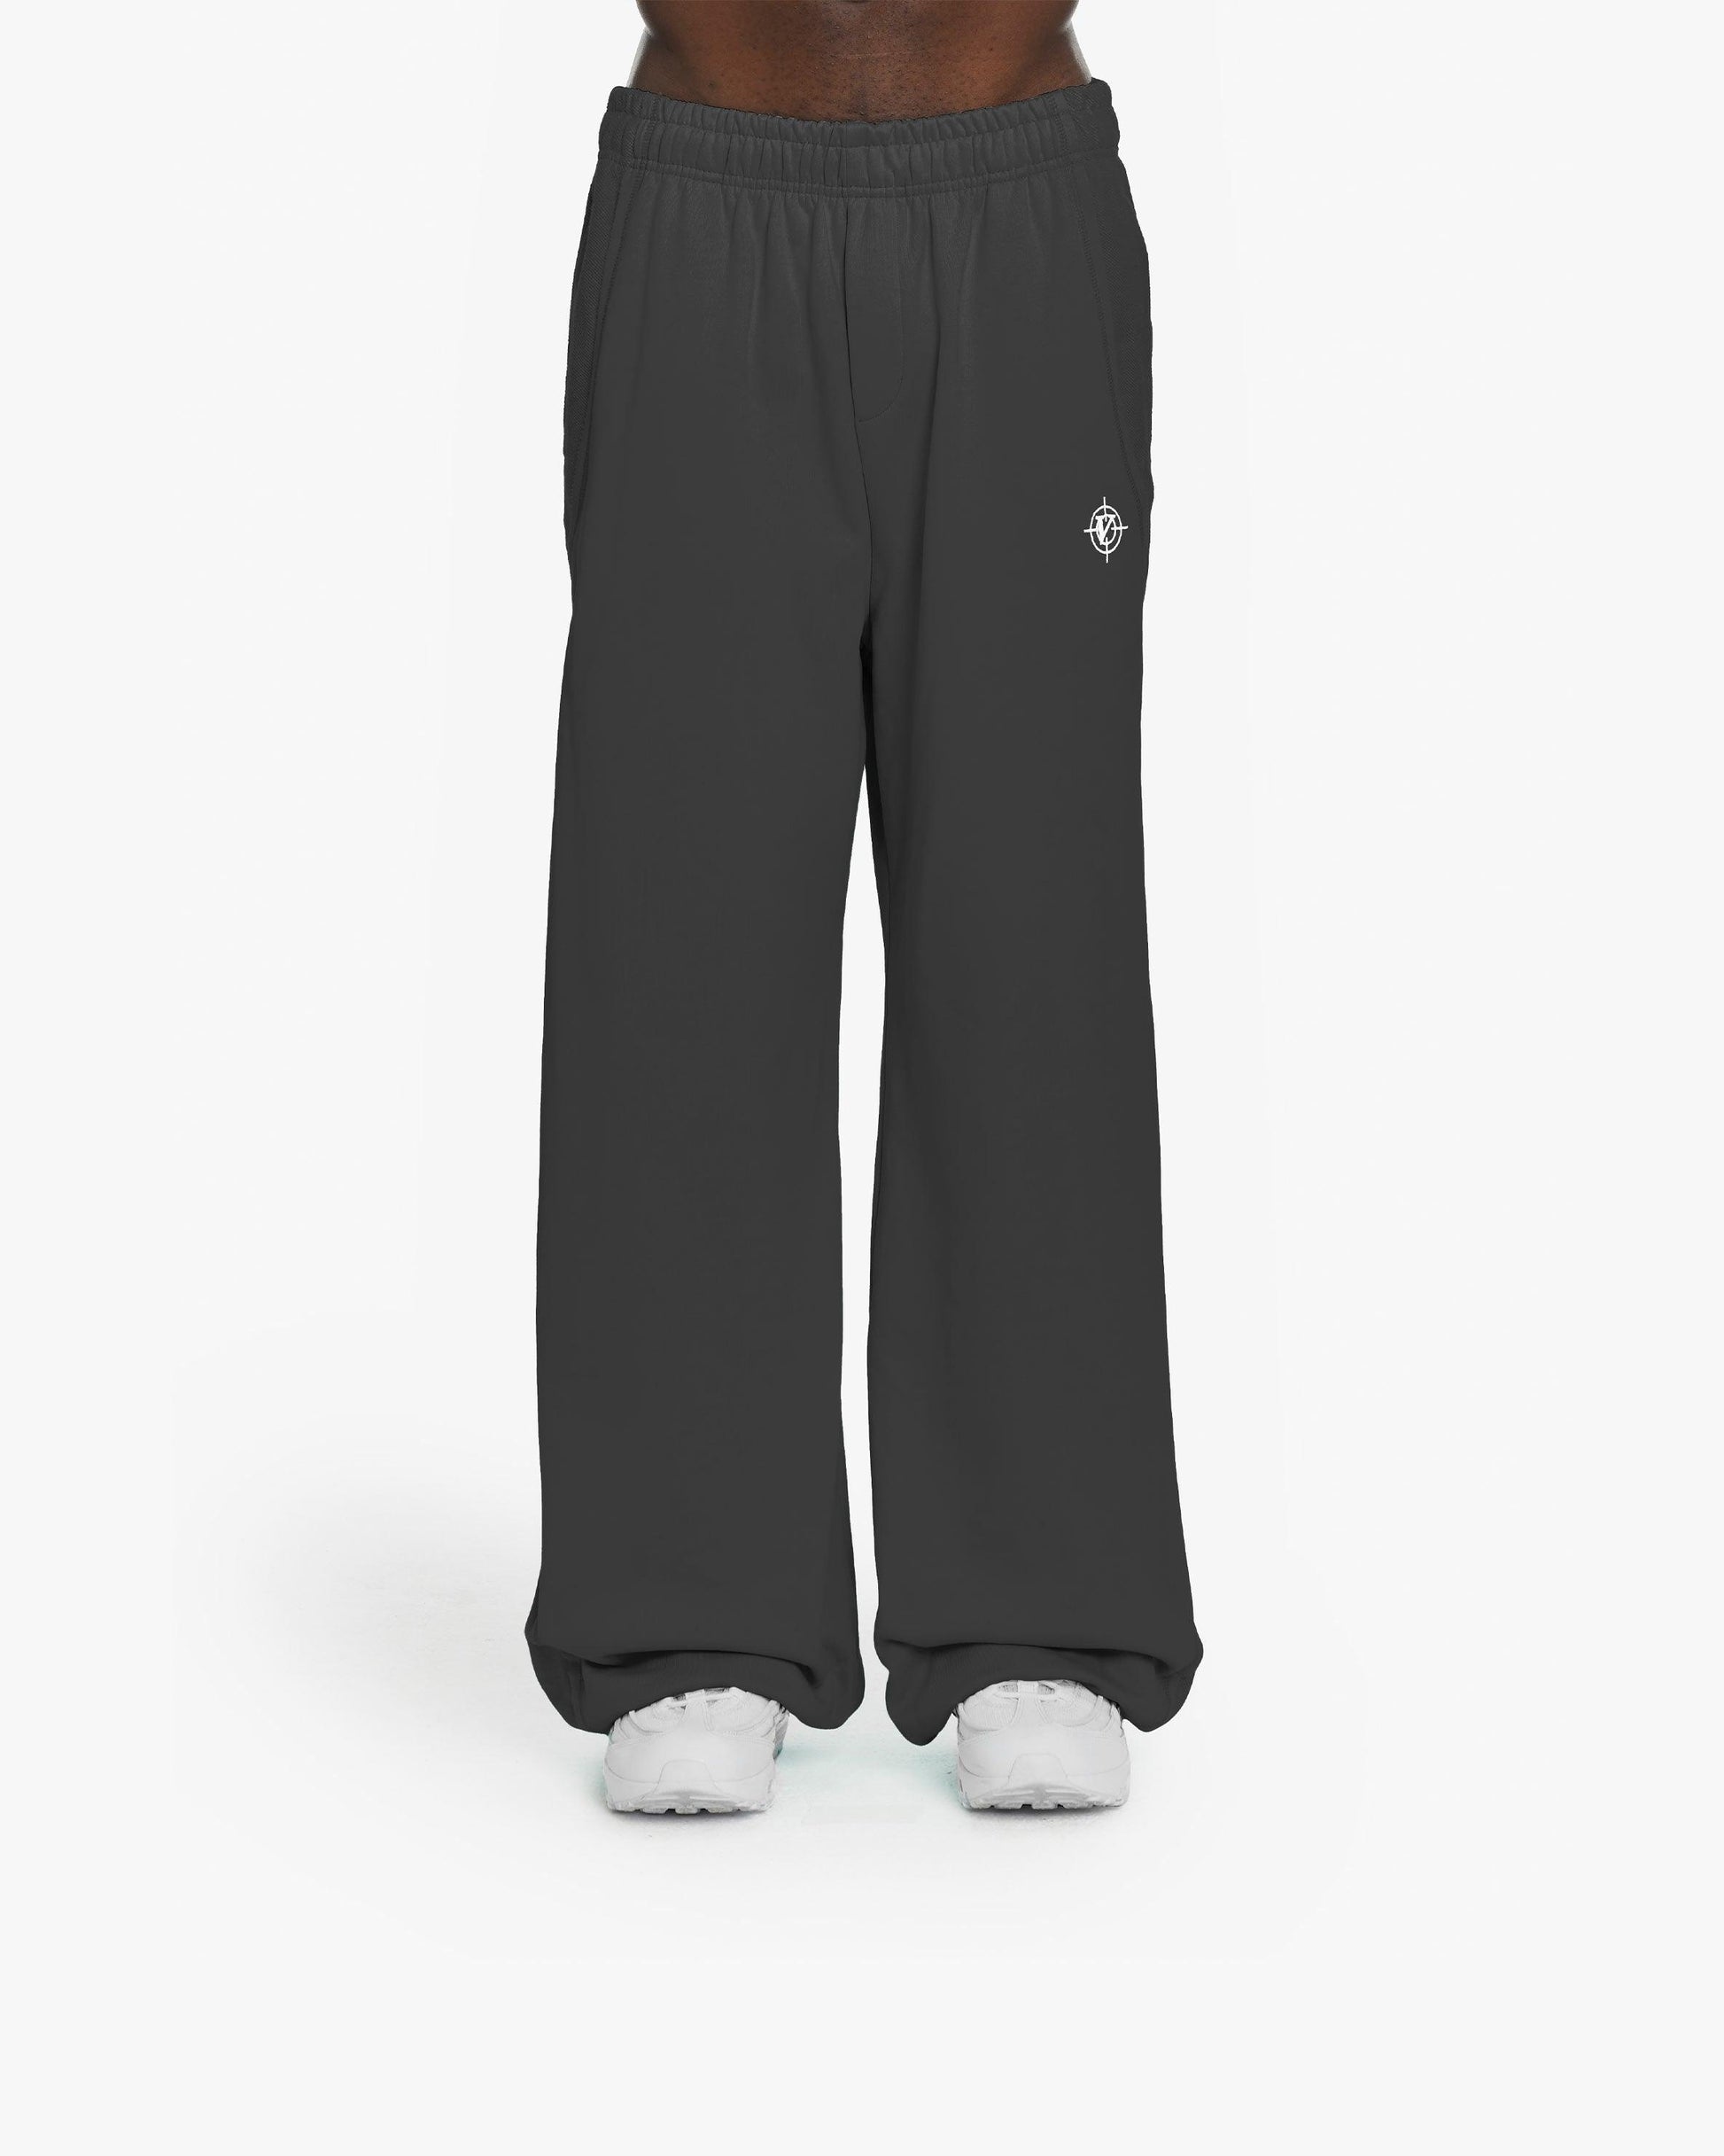 INSIDE OUT JOGGER ASH GREY - VICINITY